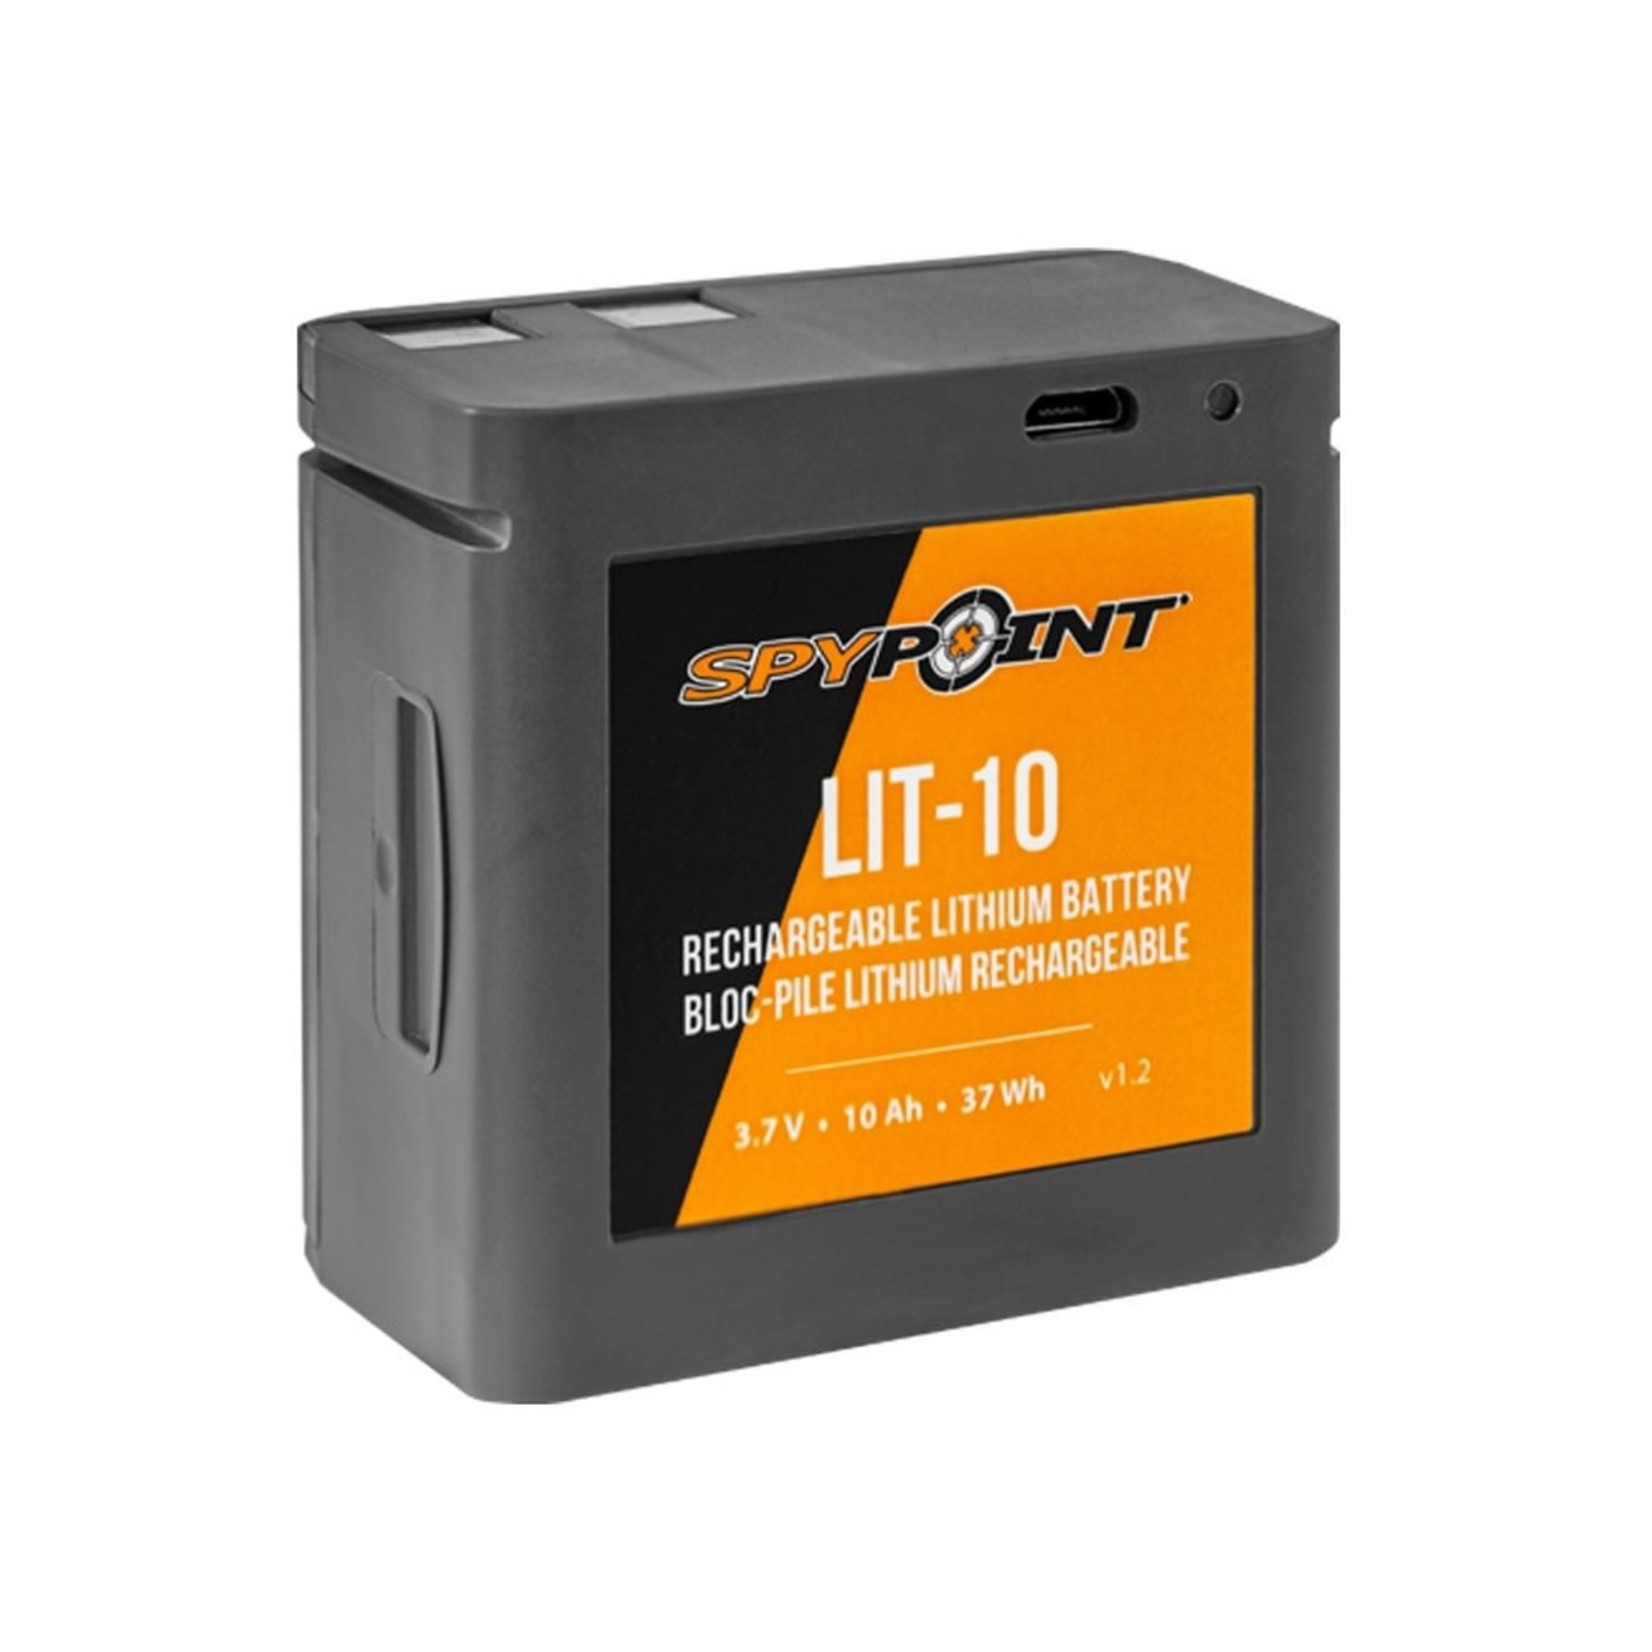 SPYPOINT Batterie Lithium Spypoint Rechargeable Lit-10